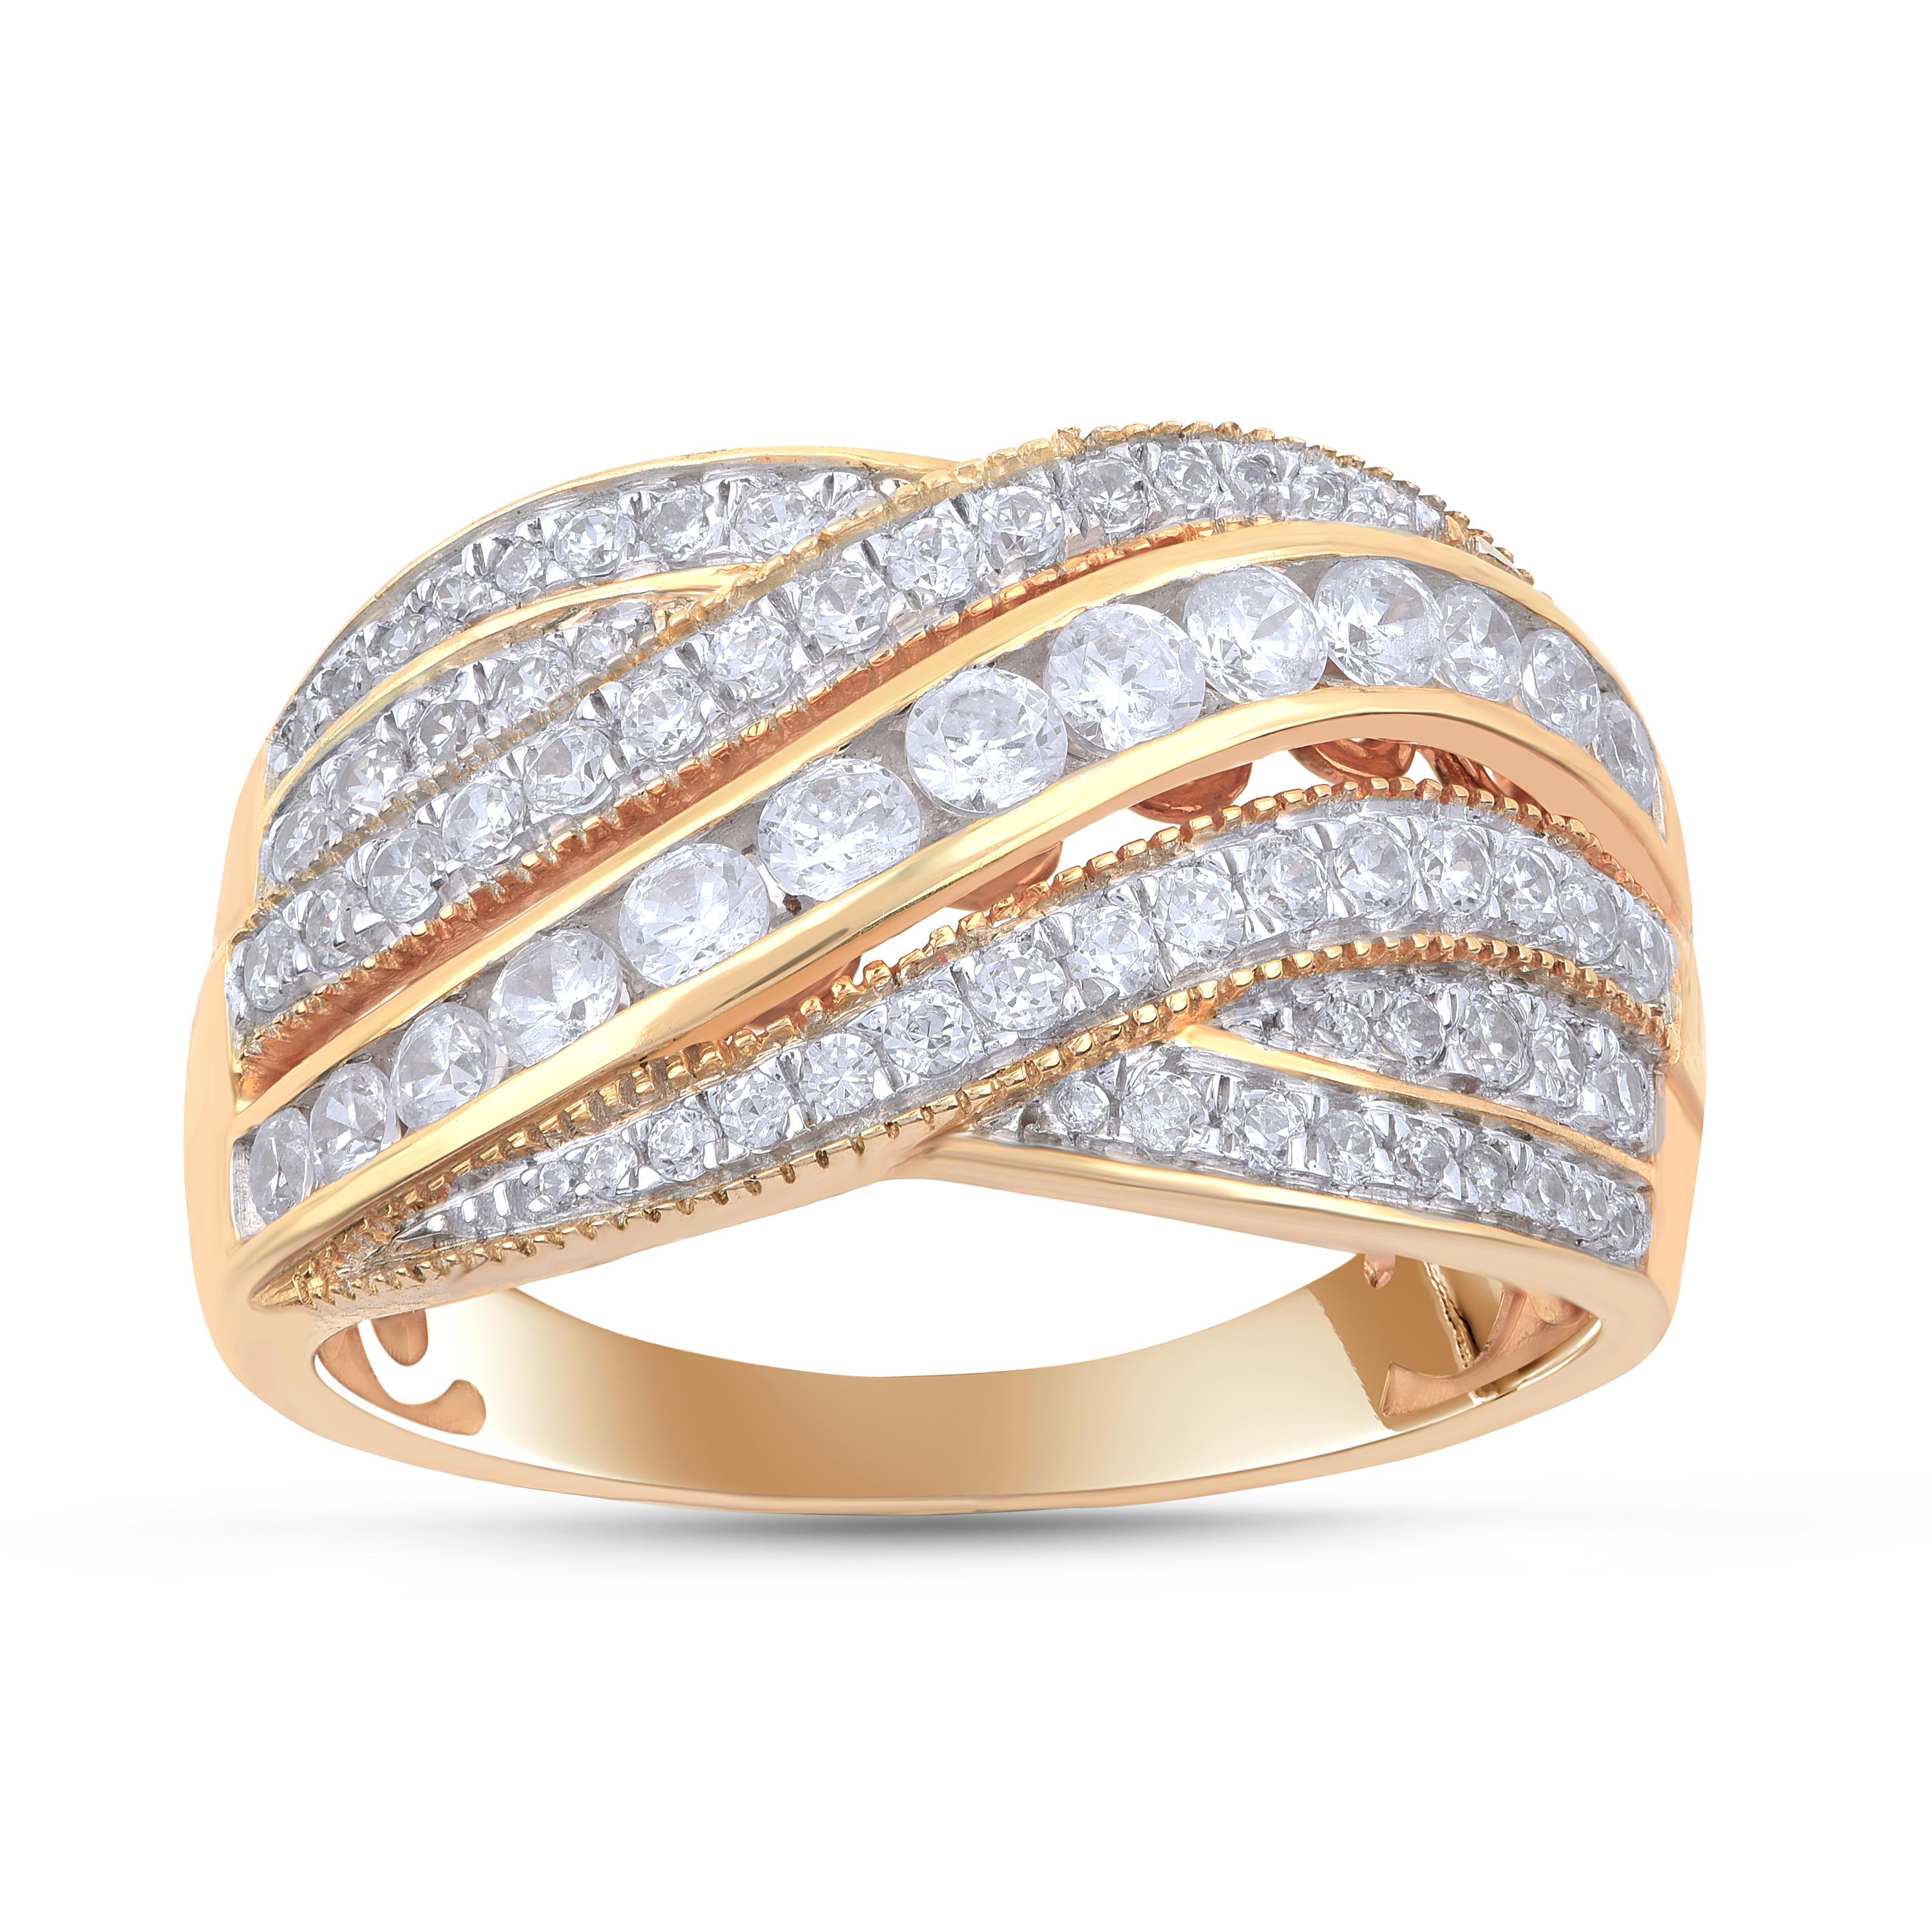 Expertly handcrafted by skillful craftsmen in 18 kt yellow gold and accentuated with 71 natural brilliant diamond set in nick and micro-pave setting. Diamonds are graded H-I Color, I2 Clarity.   

Metal color and ring size can be customized on